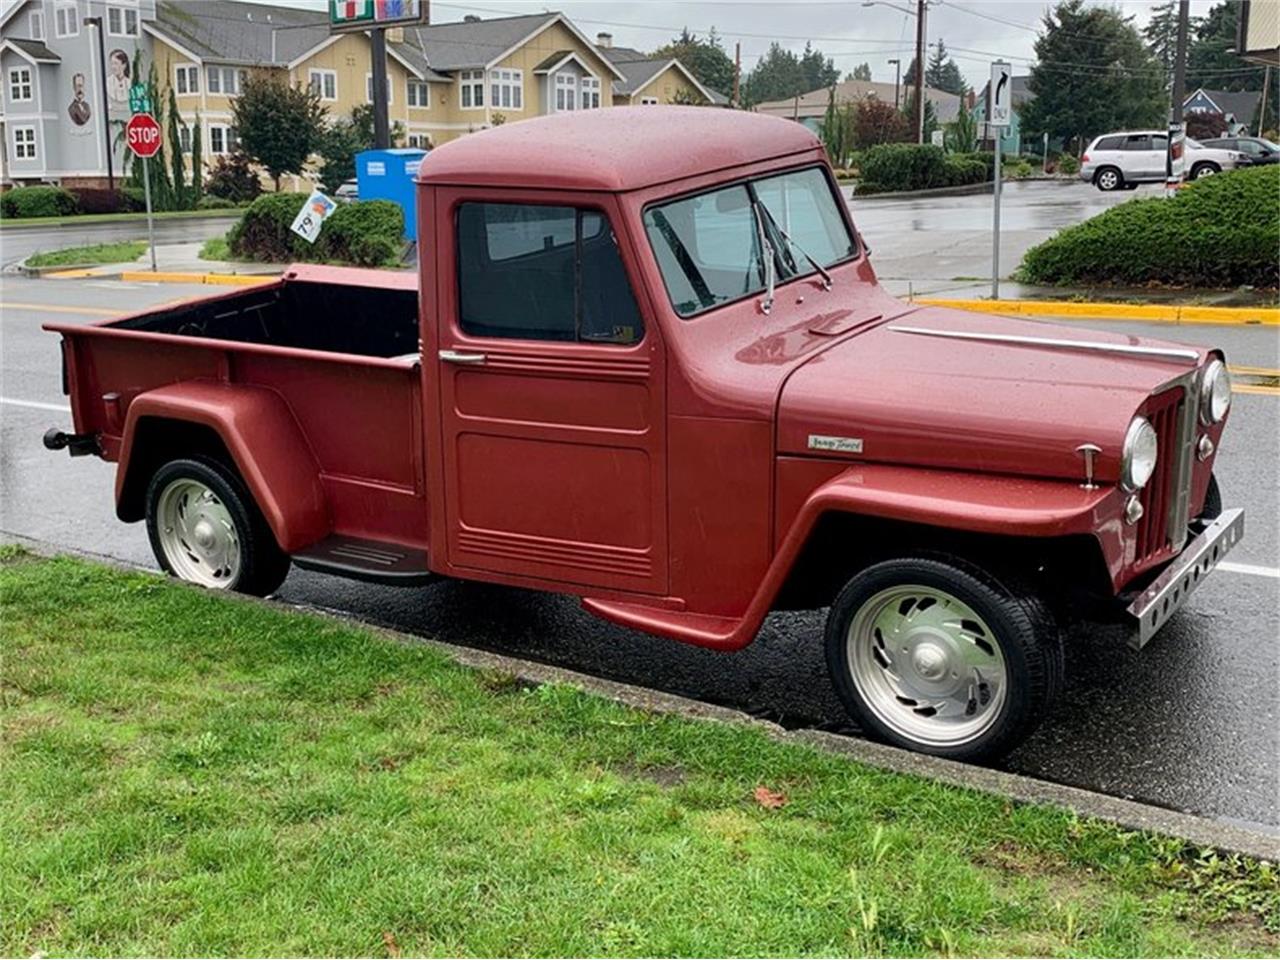 1948 Willys Pickup for Sale | ClassicCars.com | CC-1267741